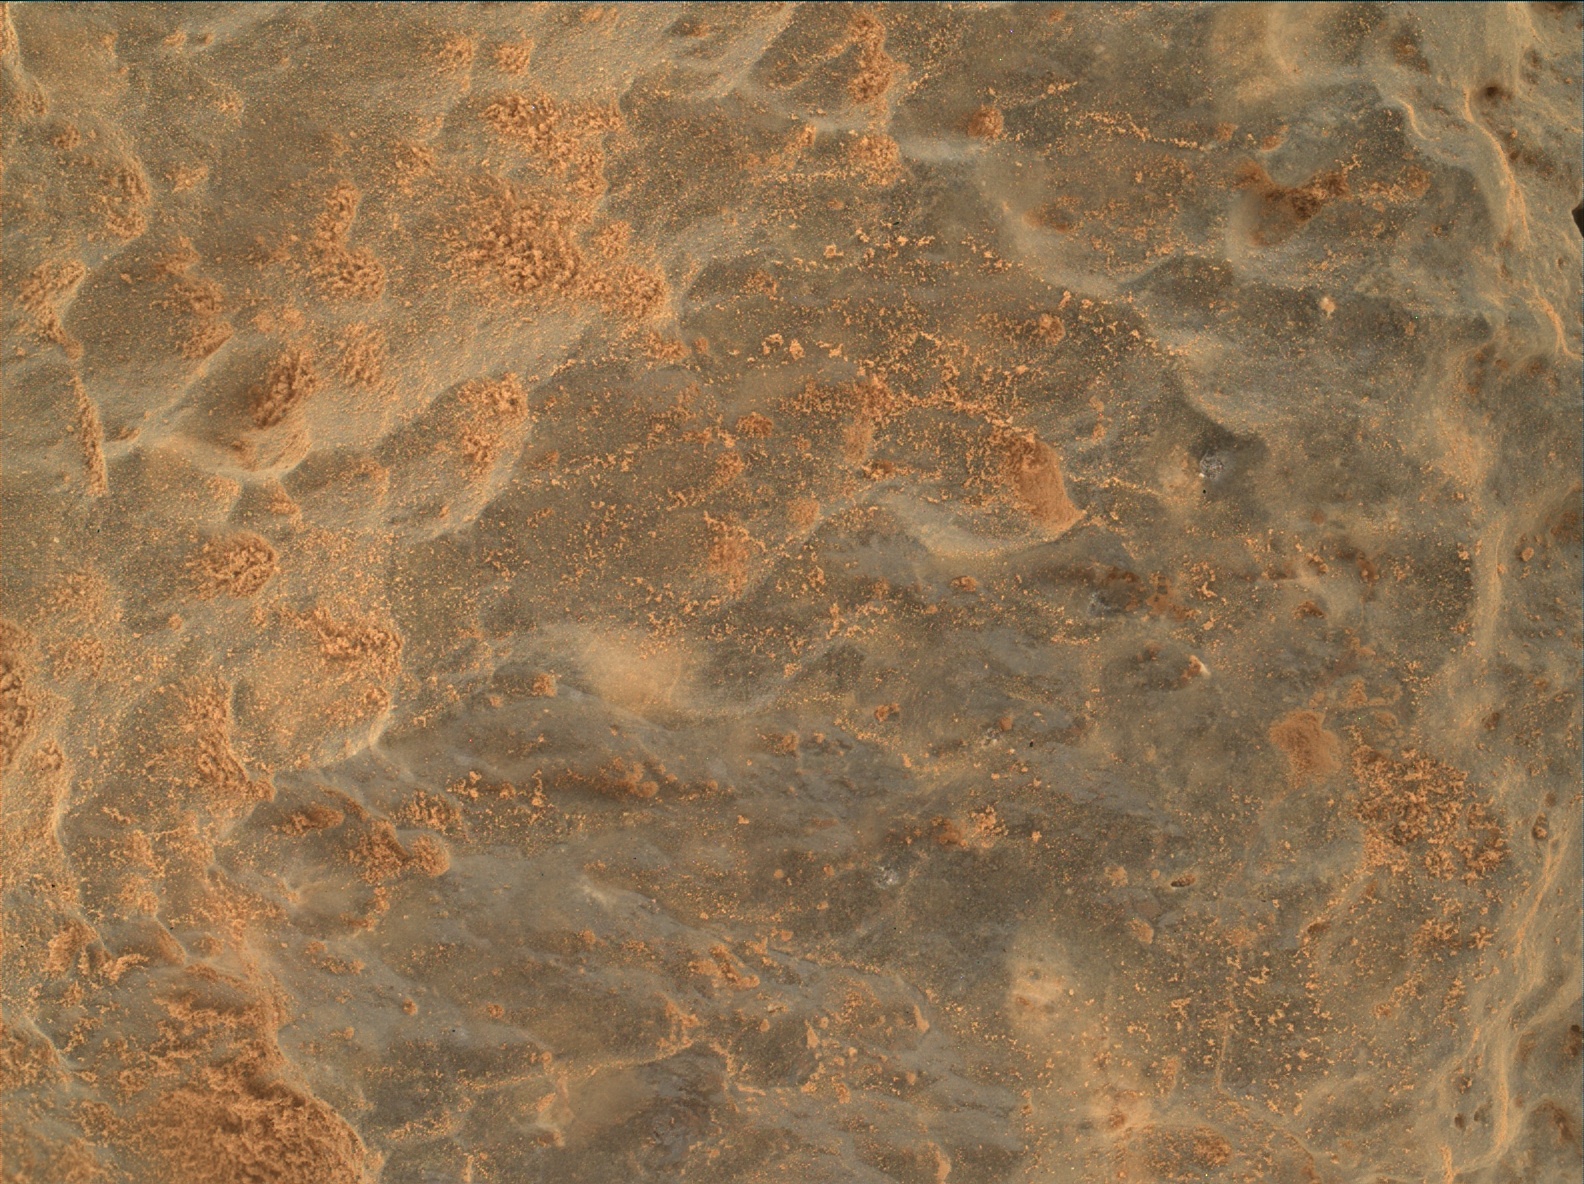 Nasa's Mars rover Curiosity acquired this image using its Mars Hand Lens Imager (MAHLI) on Sol 503